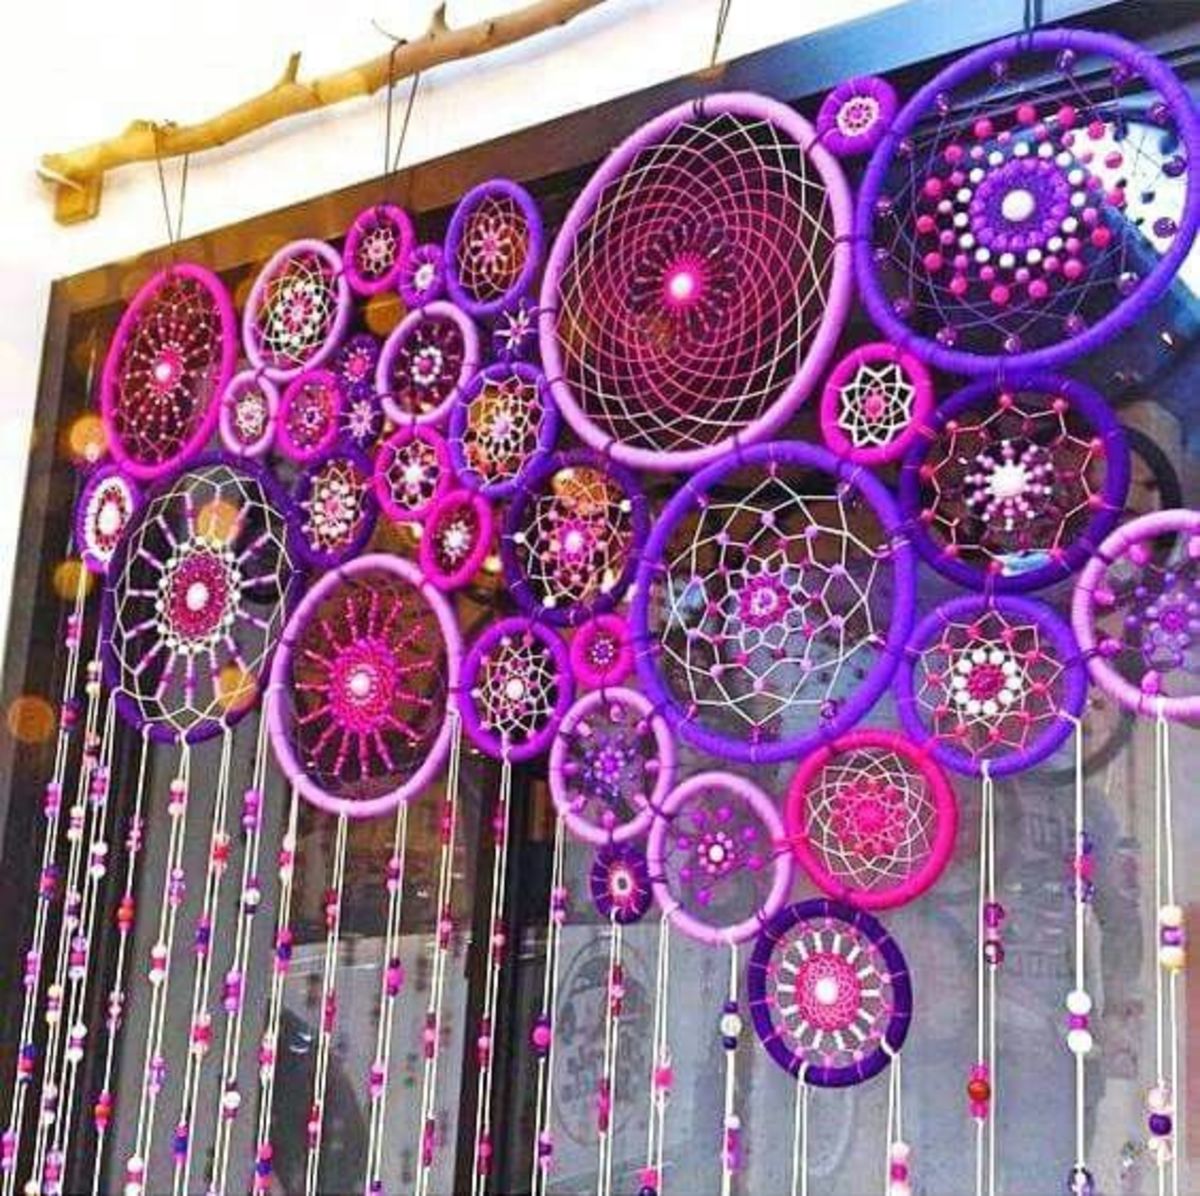 This is actually several dreamcatchers that have been interwoven to create a doorway hanging.